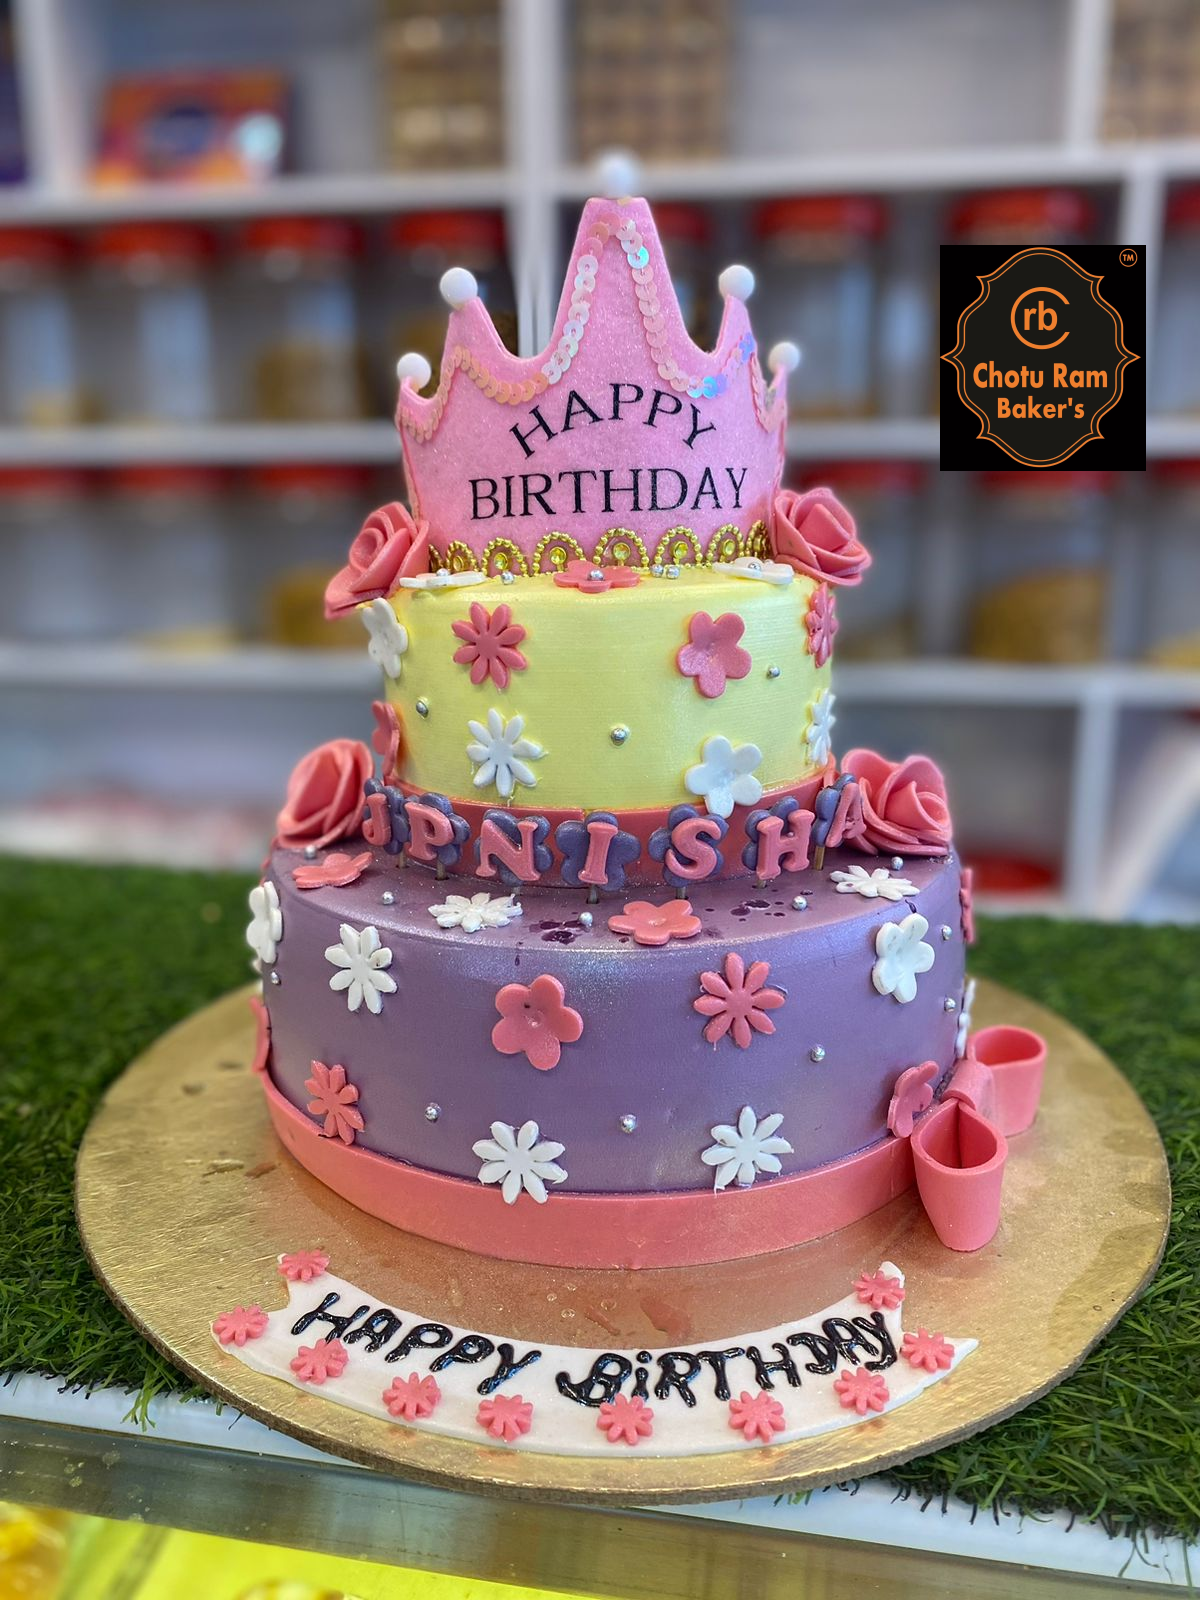 Cake Delivery in London, UK | Order PAUL's Cakes Online